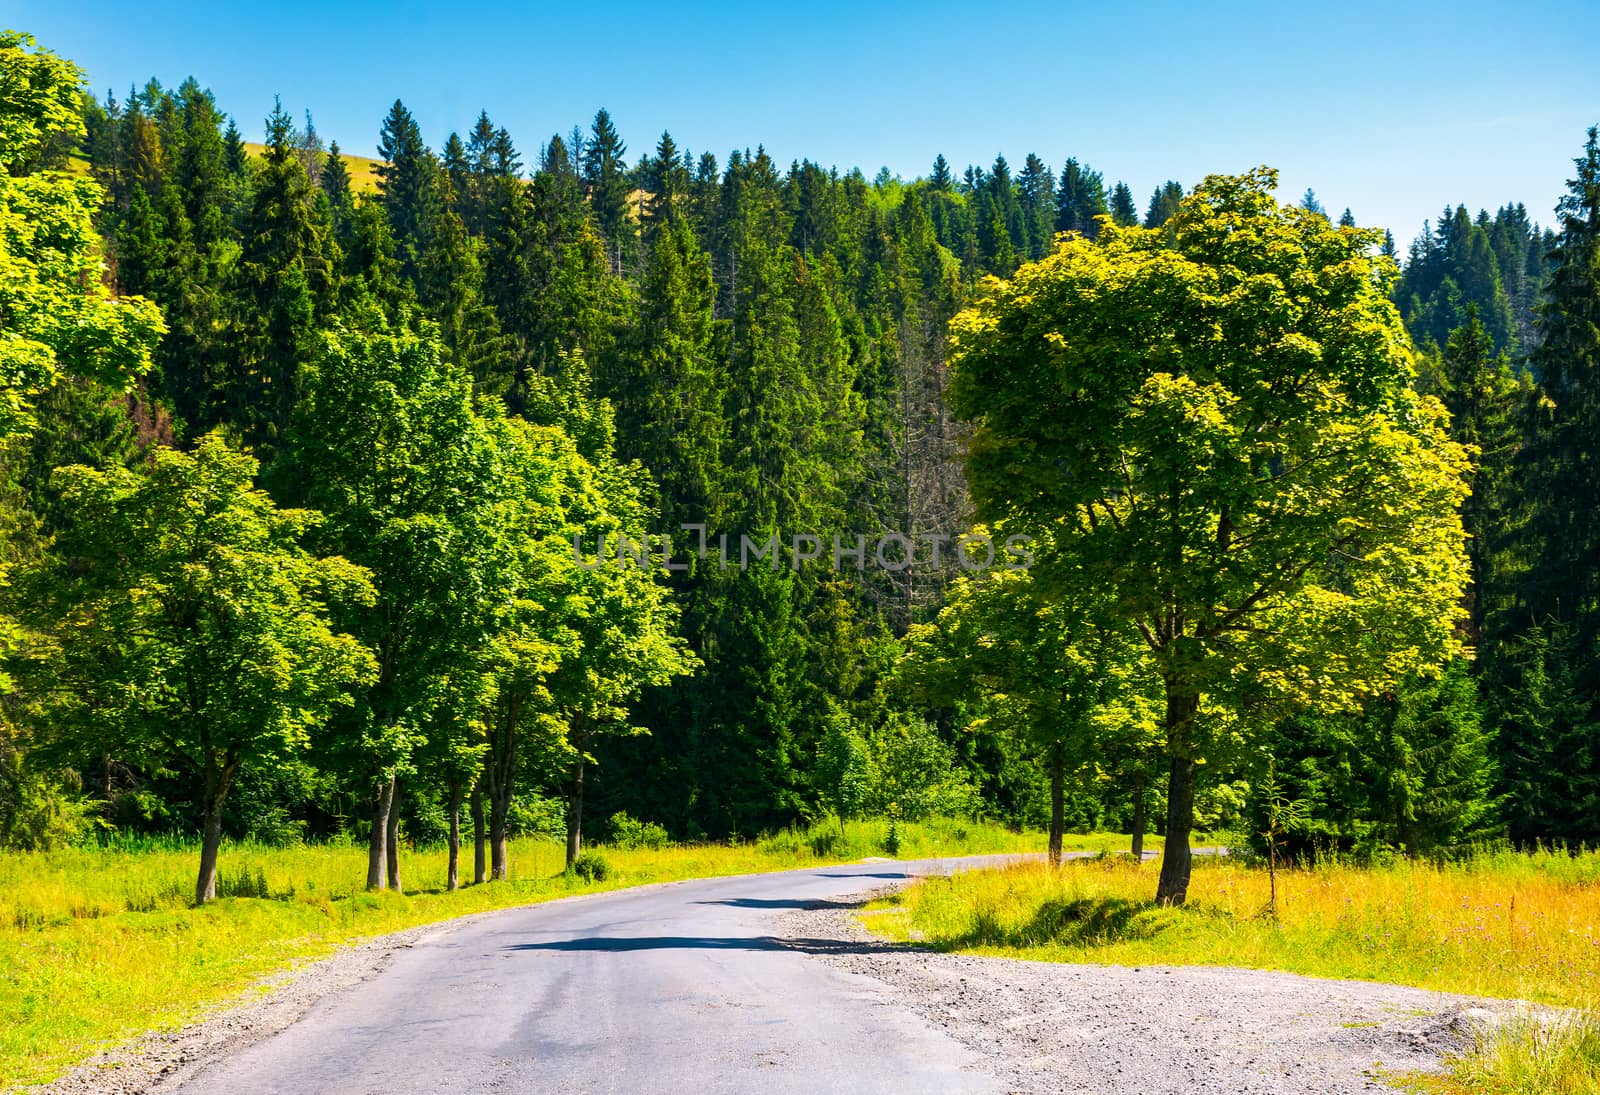 countryside road through forest by Pellinni